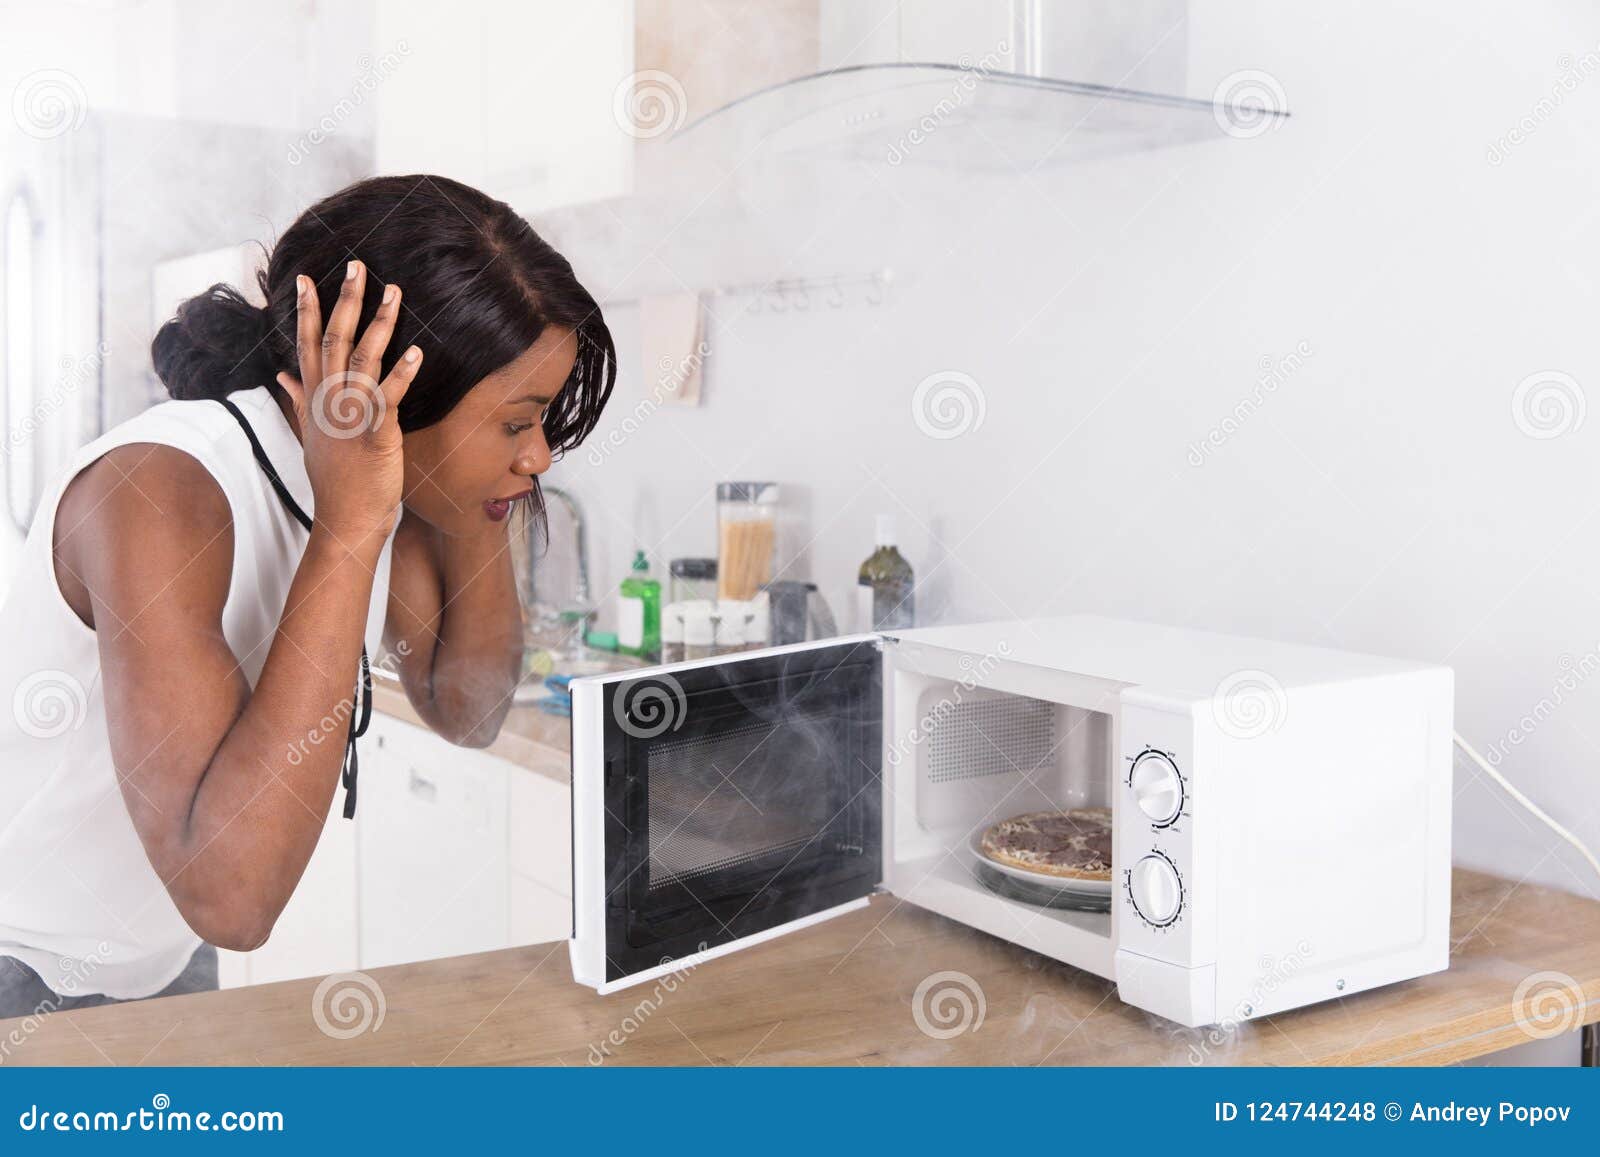 https://thumbs.dreamstime.com/z/woman-looking-burnt-pizza-microwave-oven-shocked-young-african-124744248.jpg